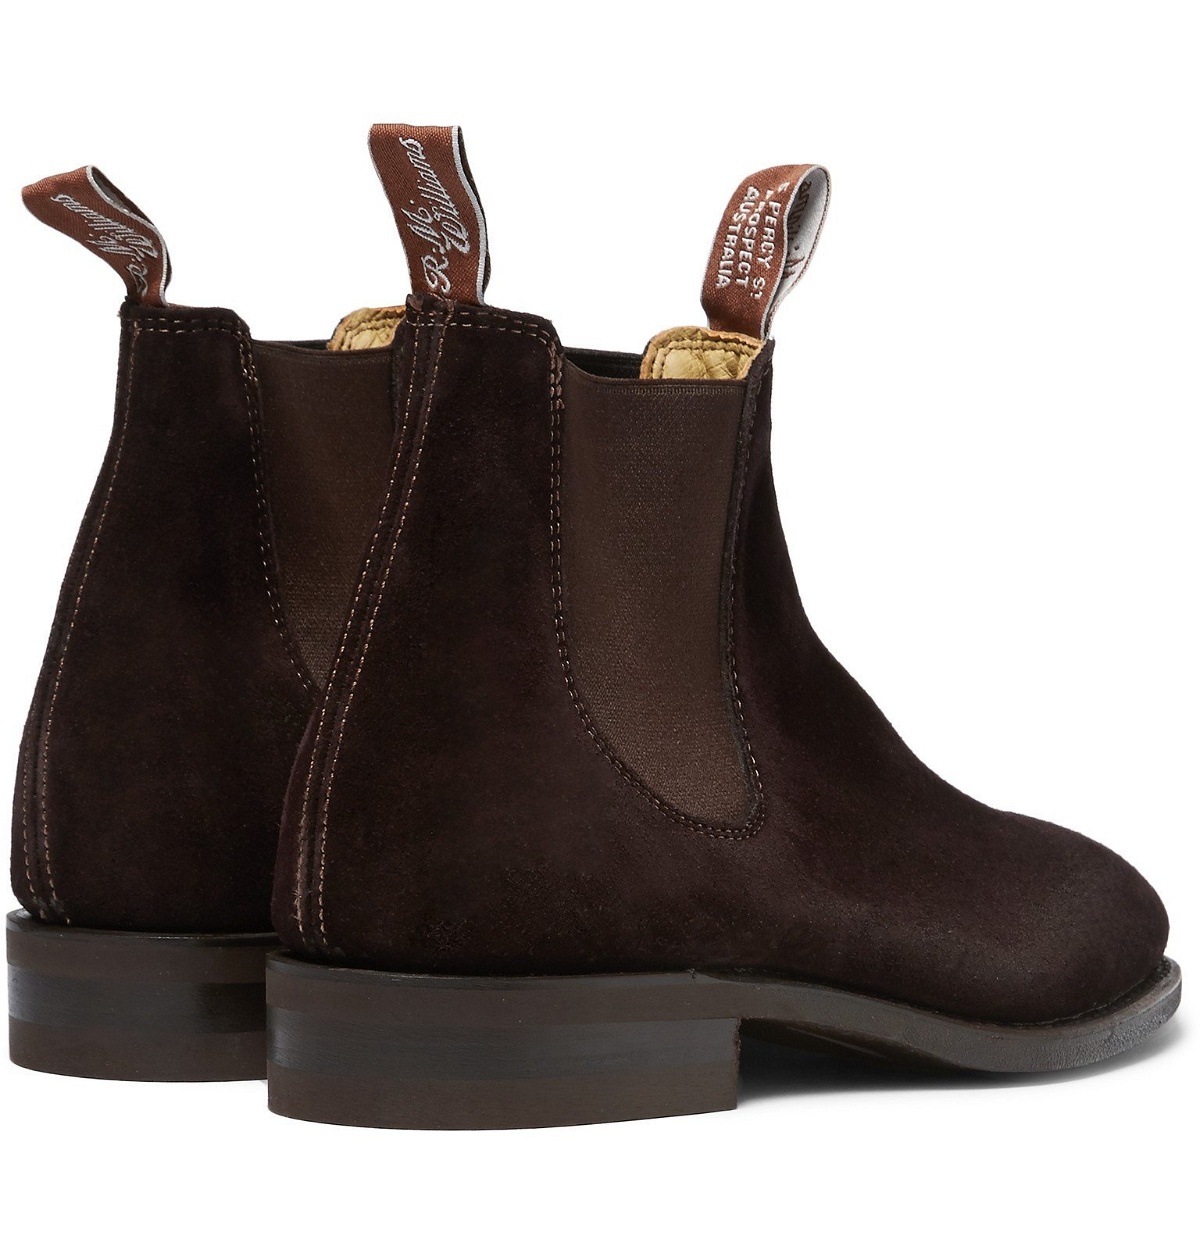 RM WILLIAMS 9G US 10? SUEDE CRAFTSMAN CHELSEA BOOTS - Body Logic